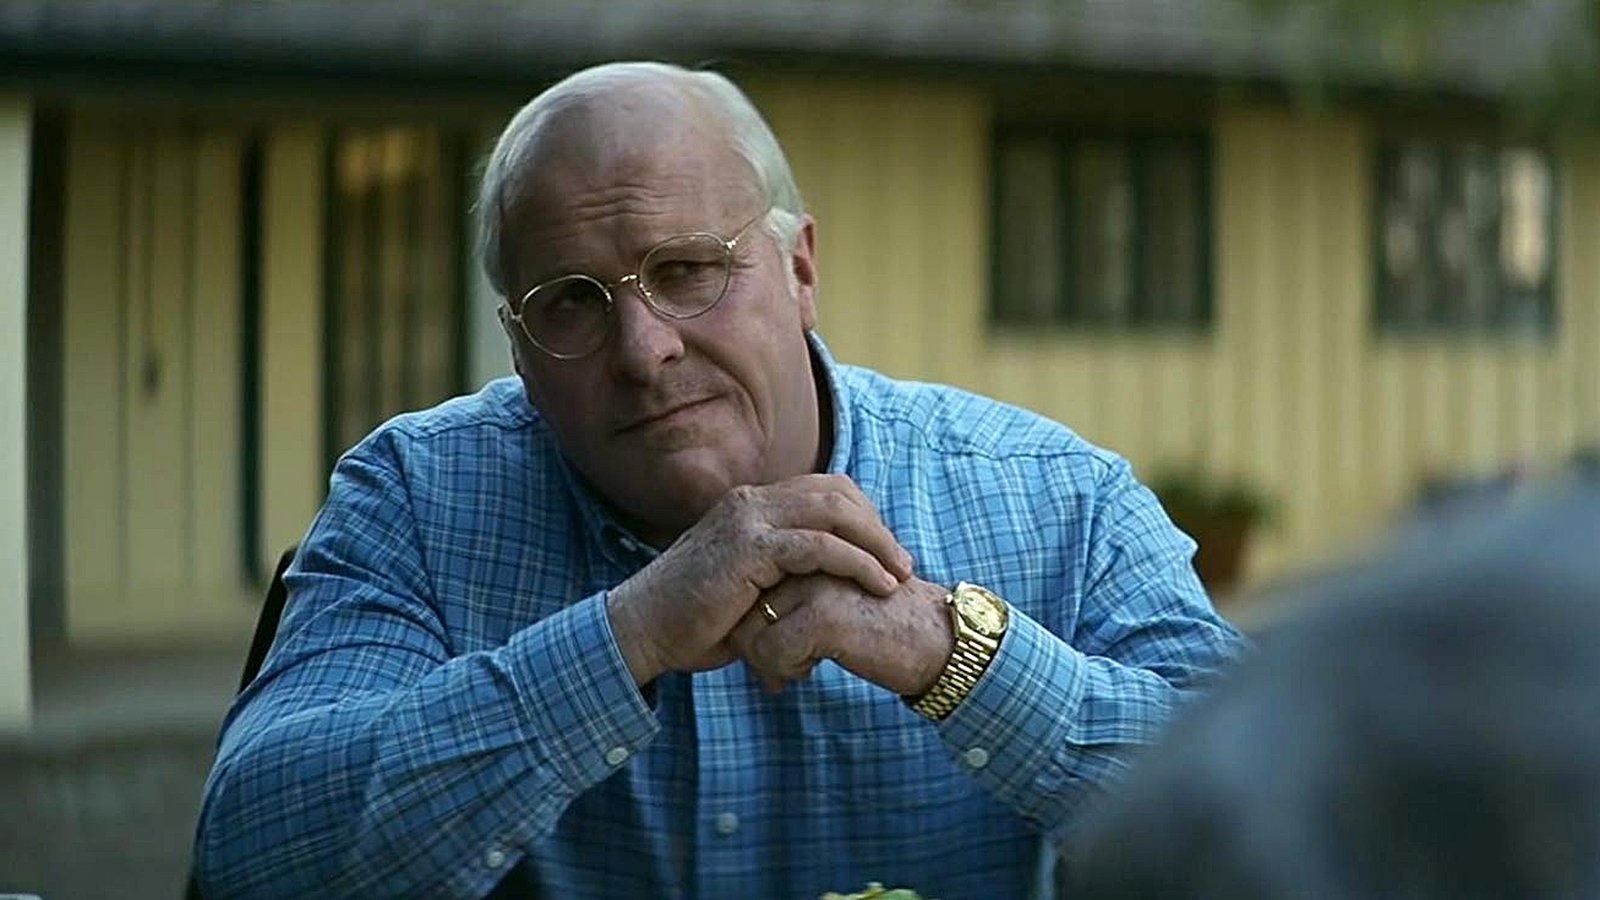 Christian bale as dick cheney